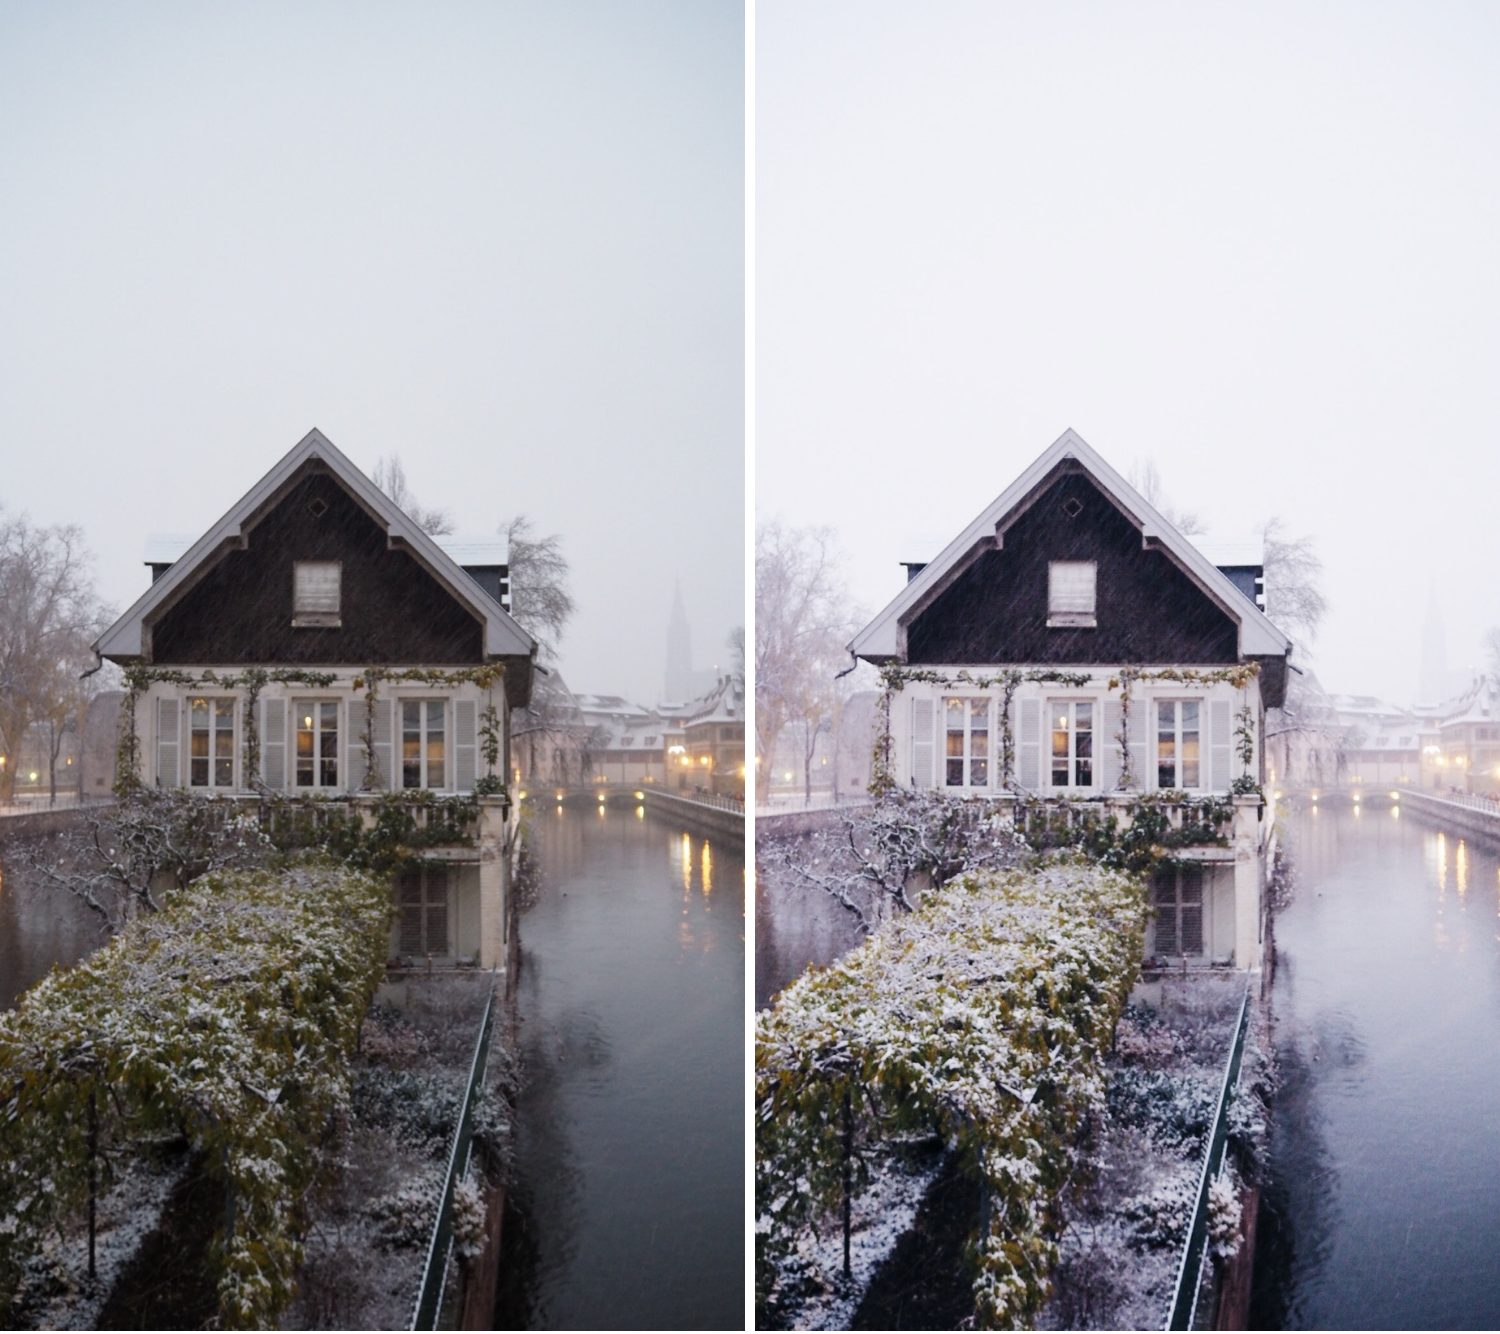 Photo before and after editing with VSCO